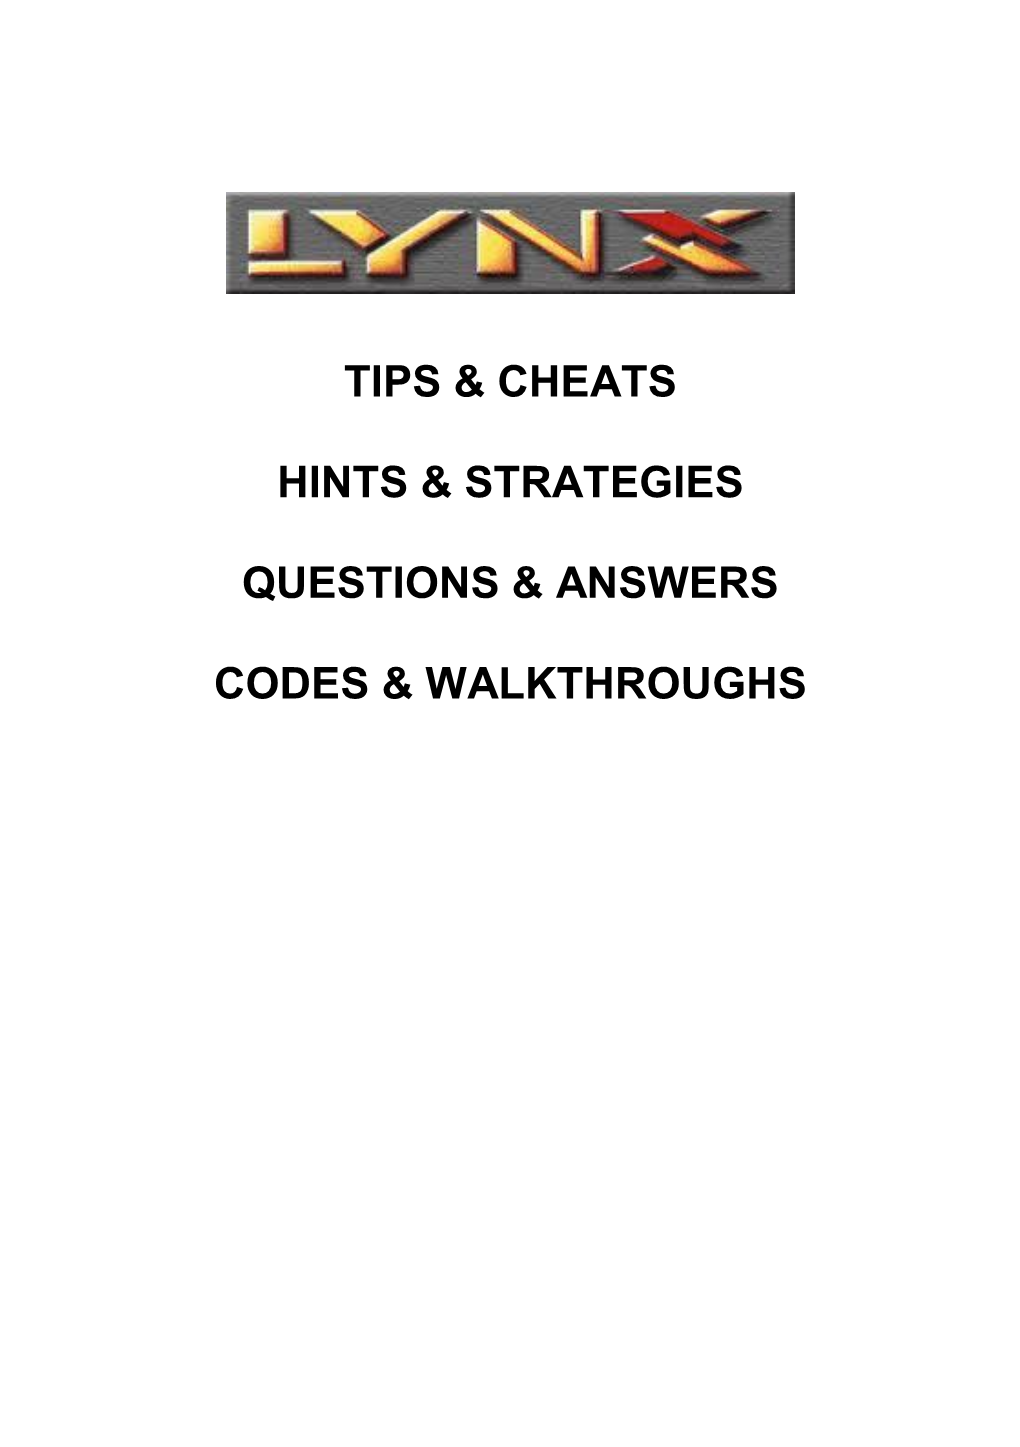 Tips & Cheats Hints & Strategies Questions & Answers Codes